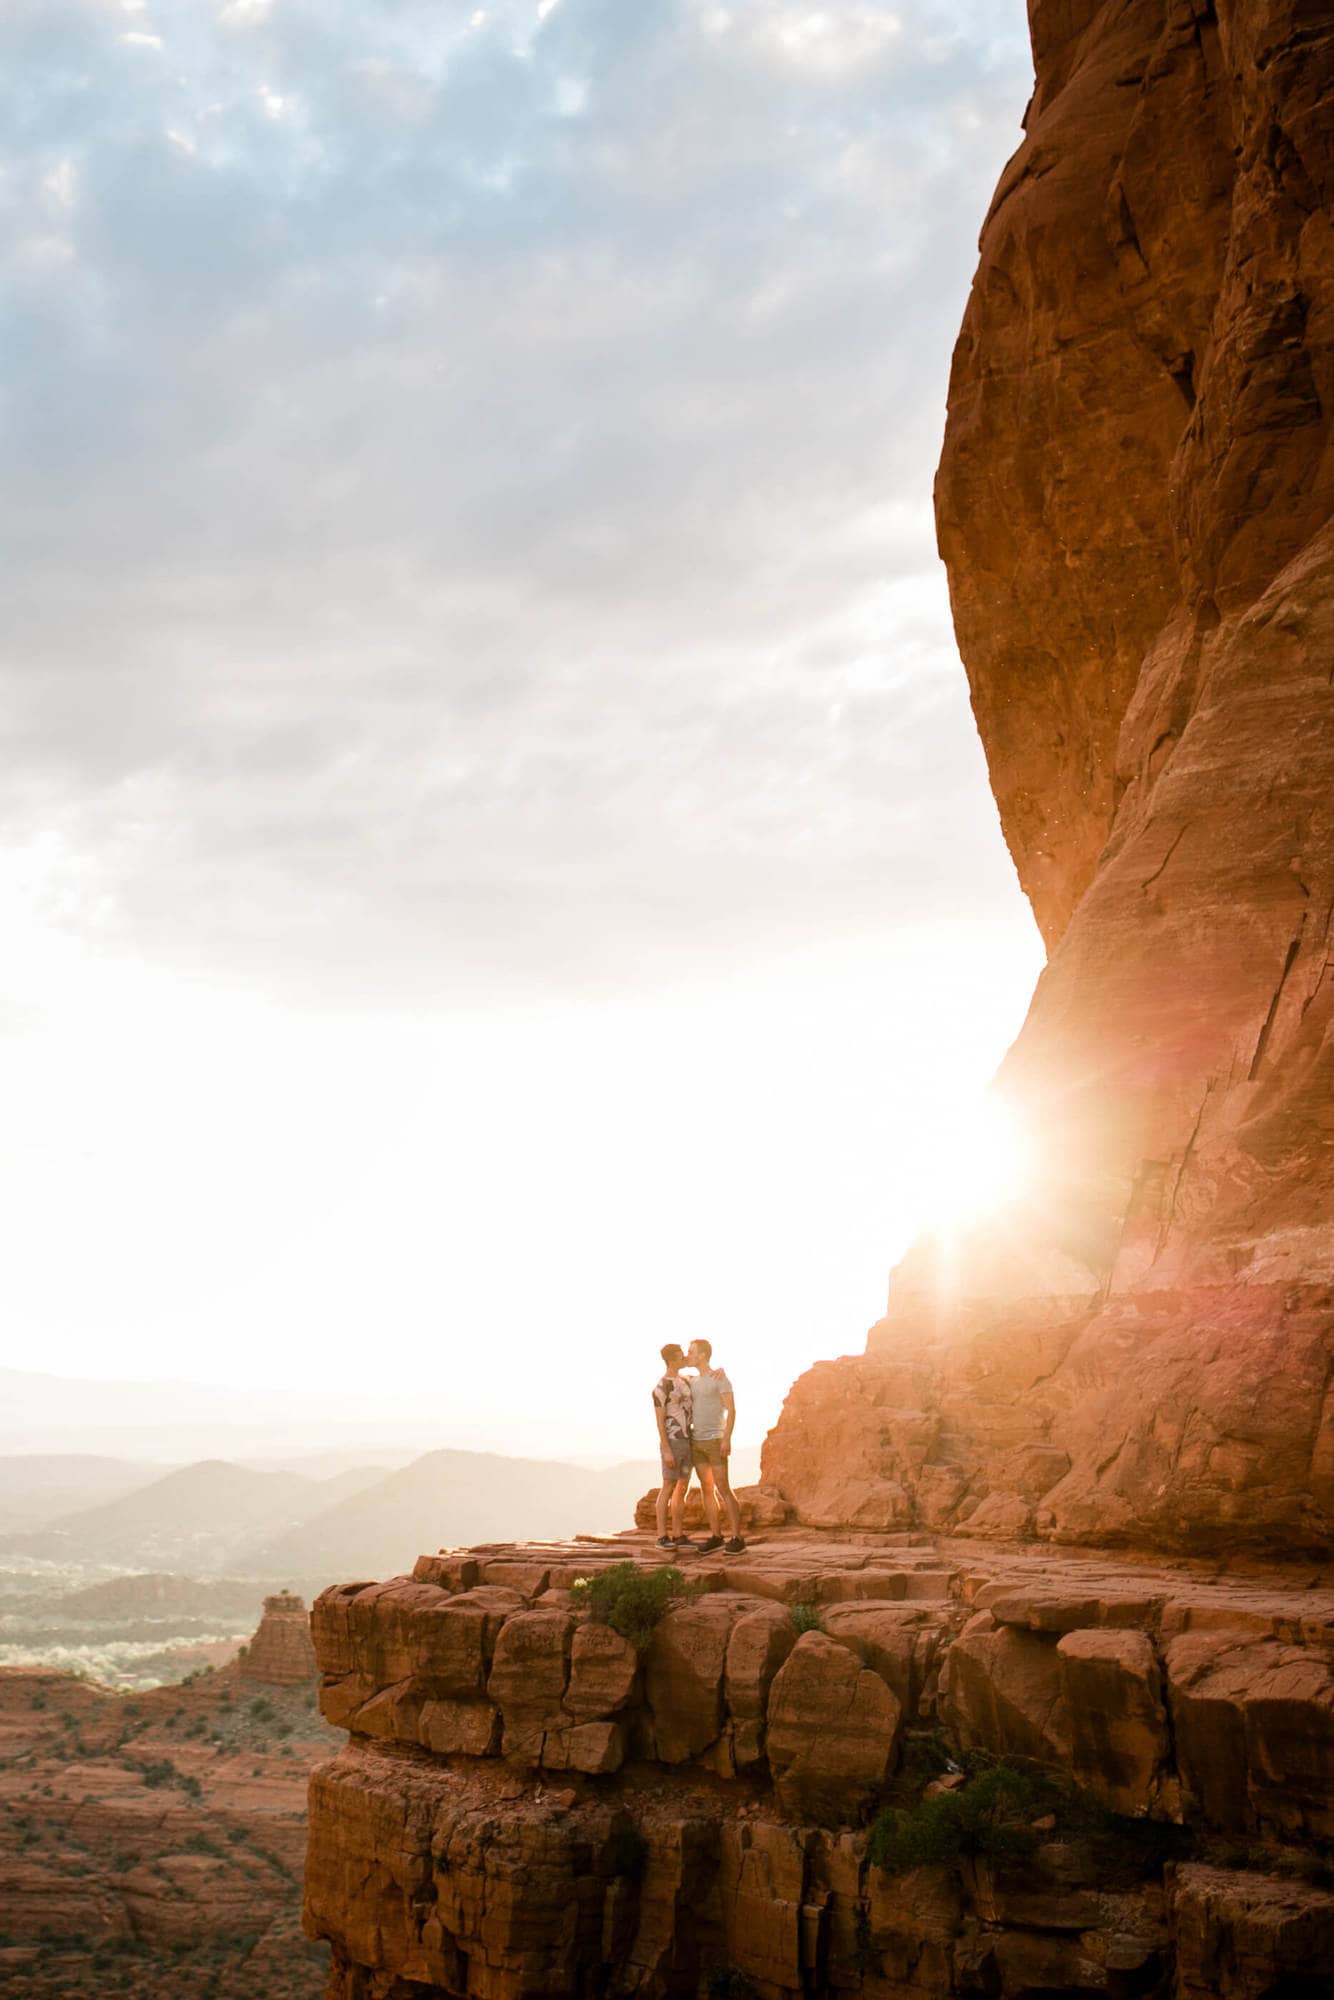 Michael and Todd traded cold midwest weather for sunny, epic views during their Hiking Adventure session in Sedona Arizona.